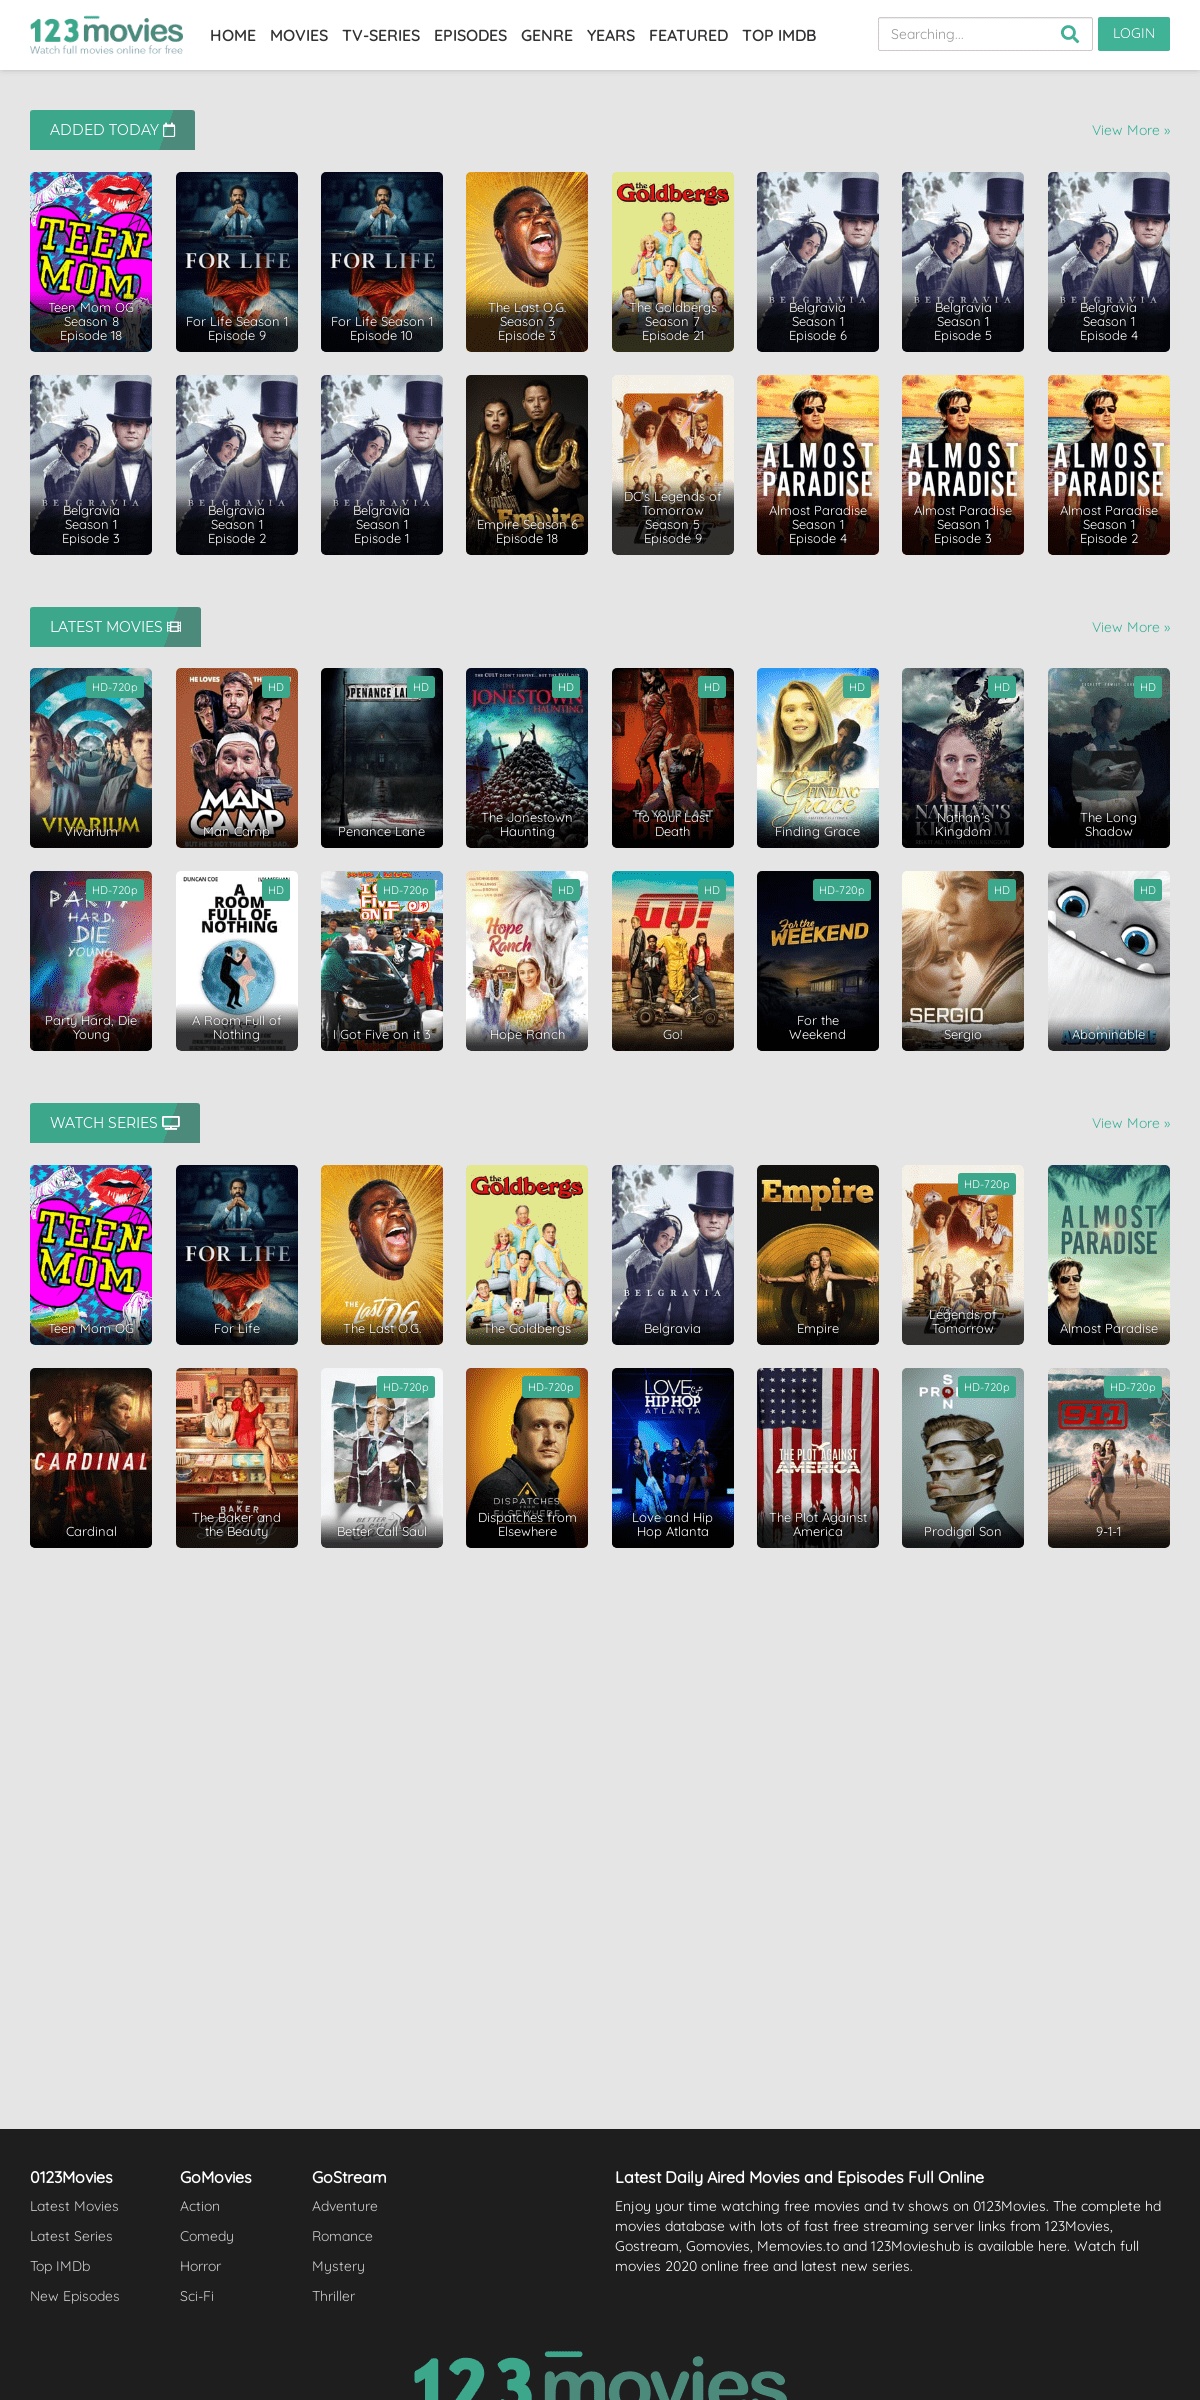 A complete backup of 0123movies.gdn